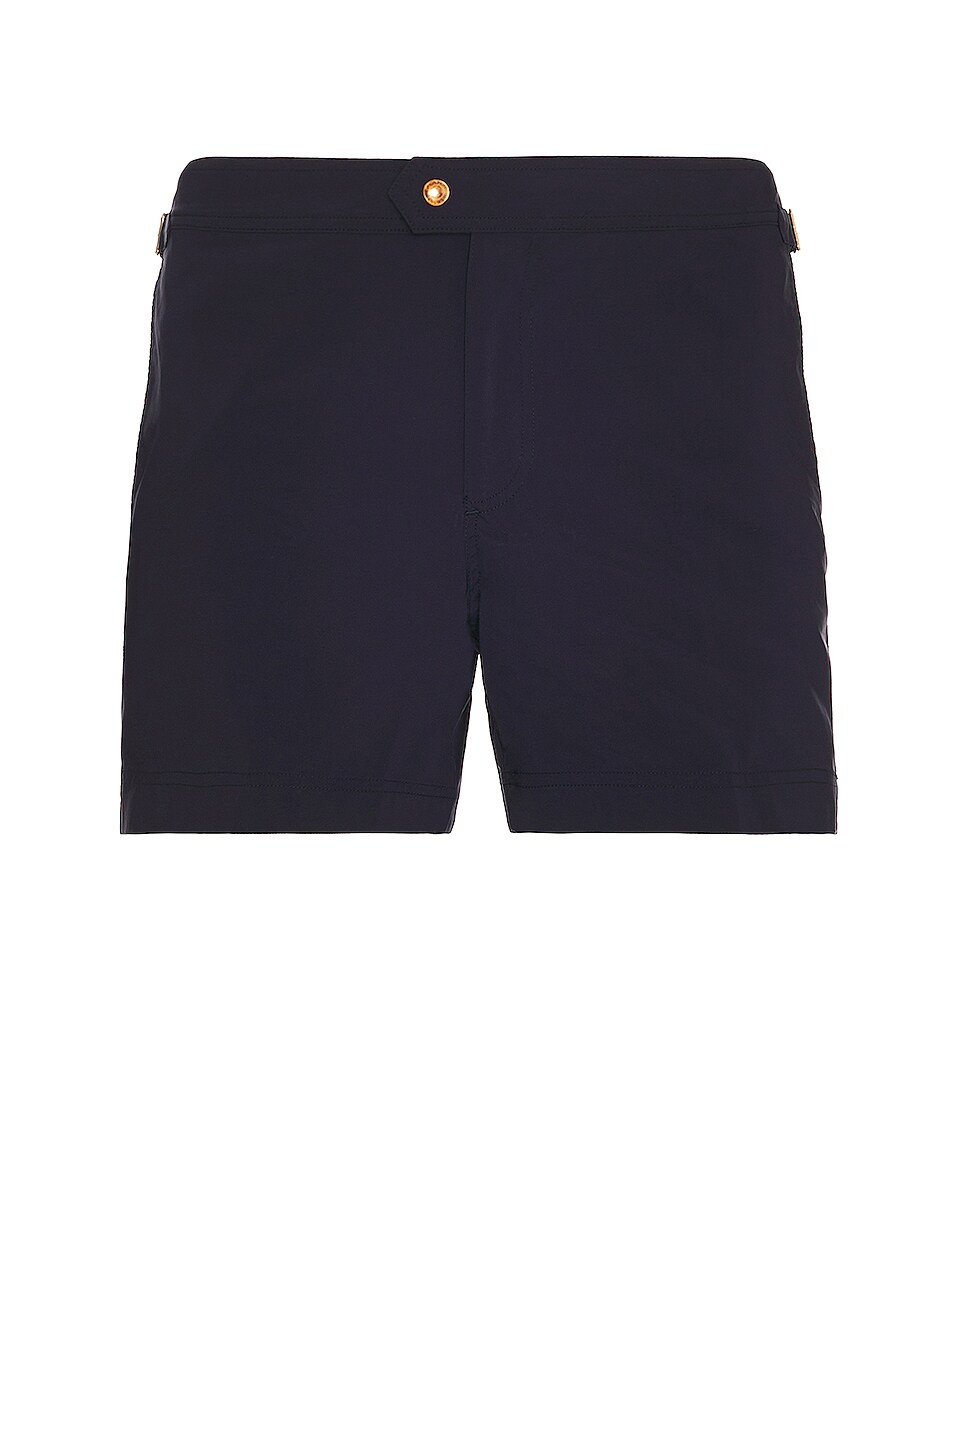 Image 1 of TOM FORD Micro Compact Swim Short in Black